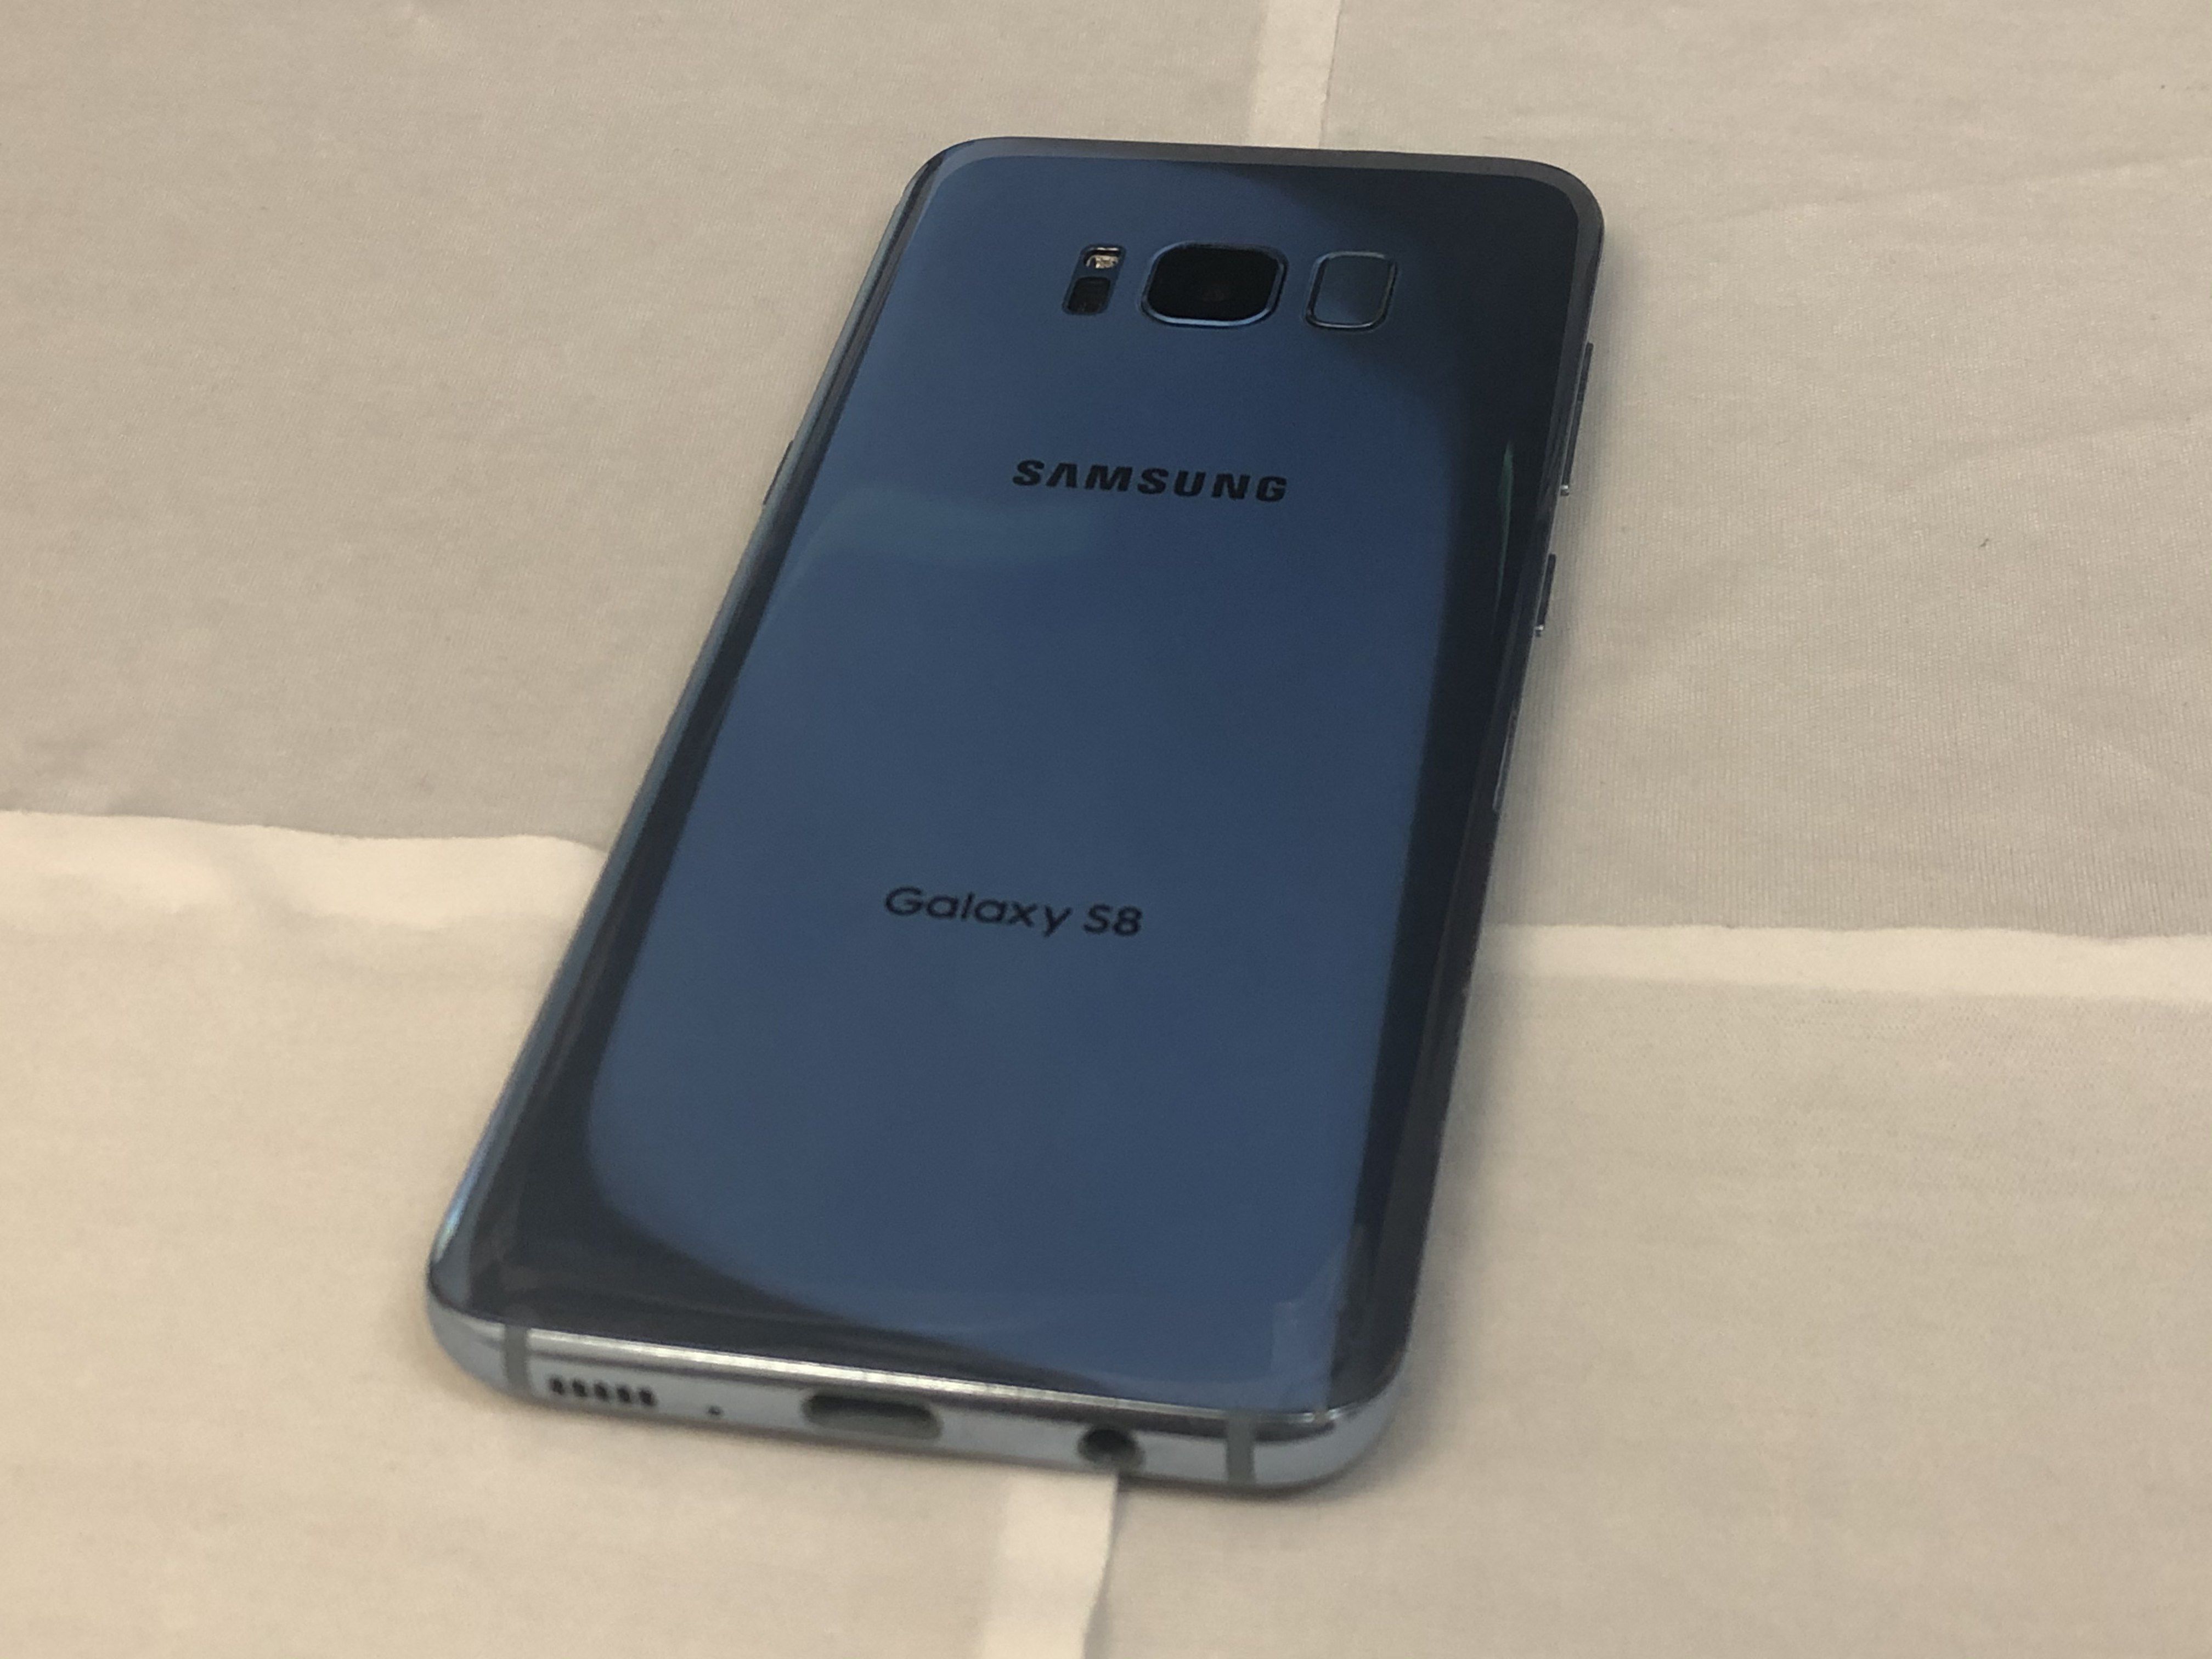 Samsung Galaxy S8 64GB || Blue || *UNLOCKED* for AT&T / Cricket / T-Mobile / MetroPCS / Simple Mobile / Sprint / Verizon / others WORLWIDE